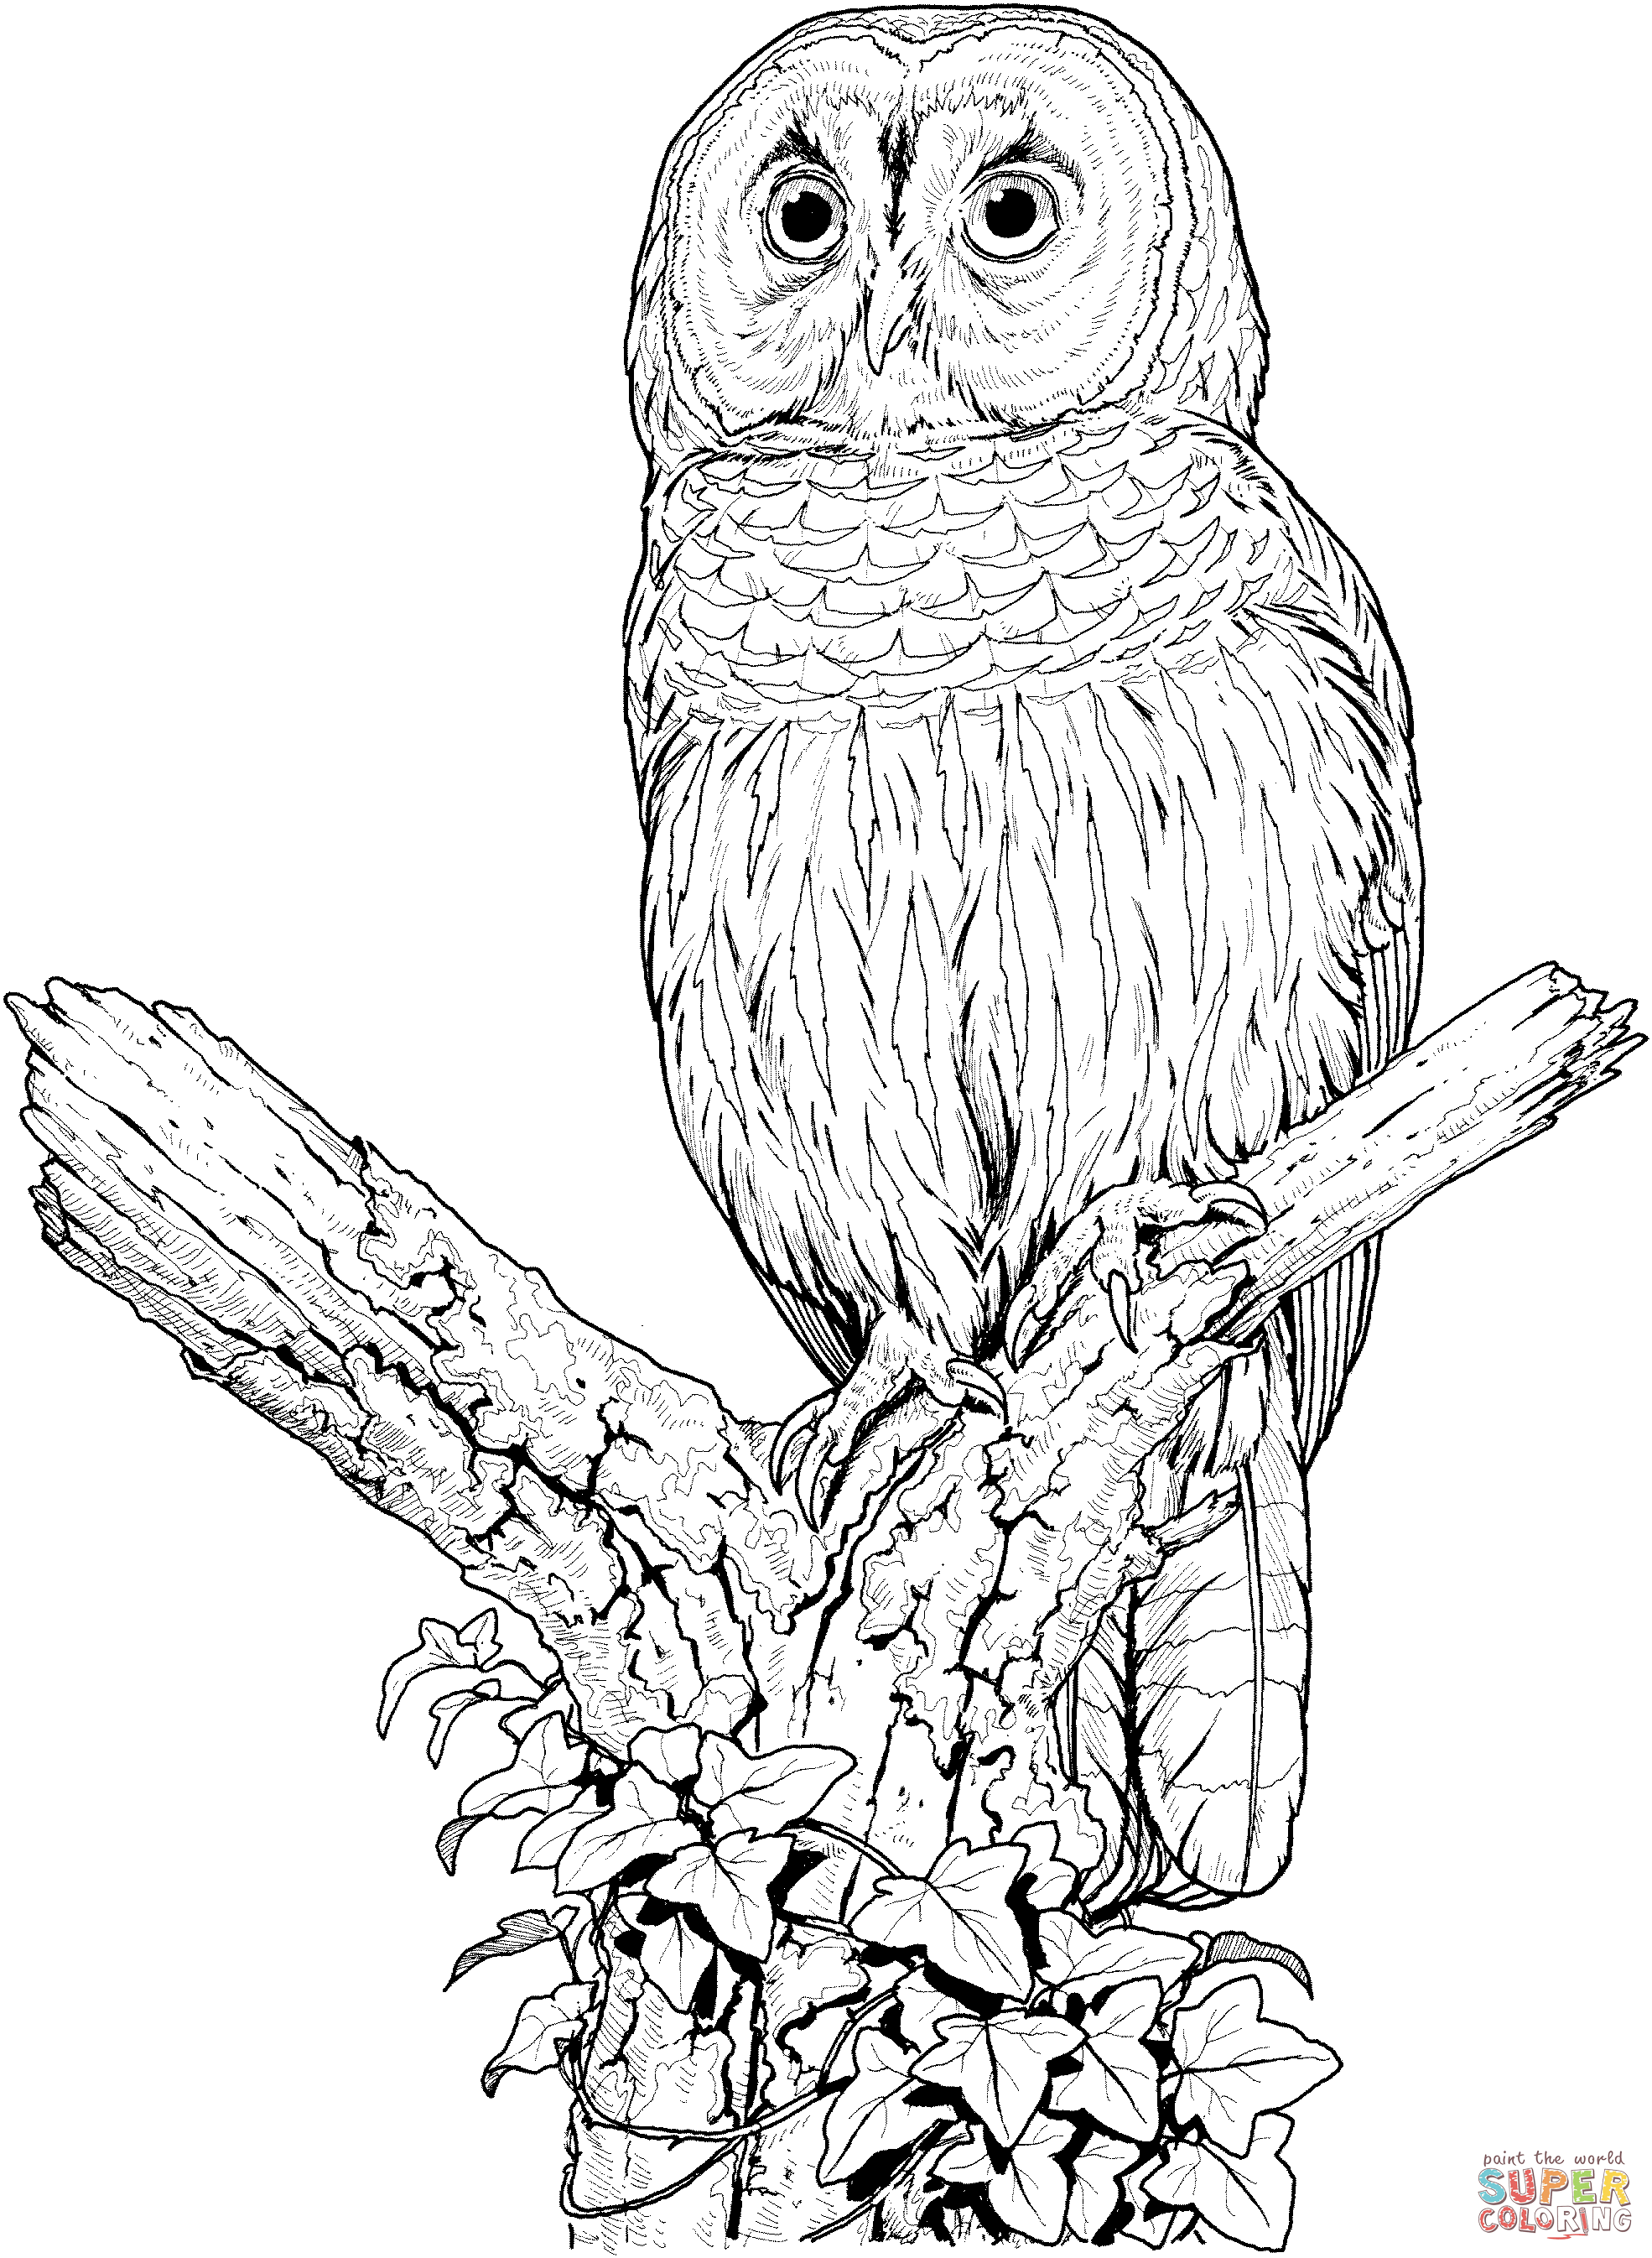 Barred Owl coloring #13, Download drawings